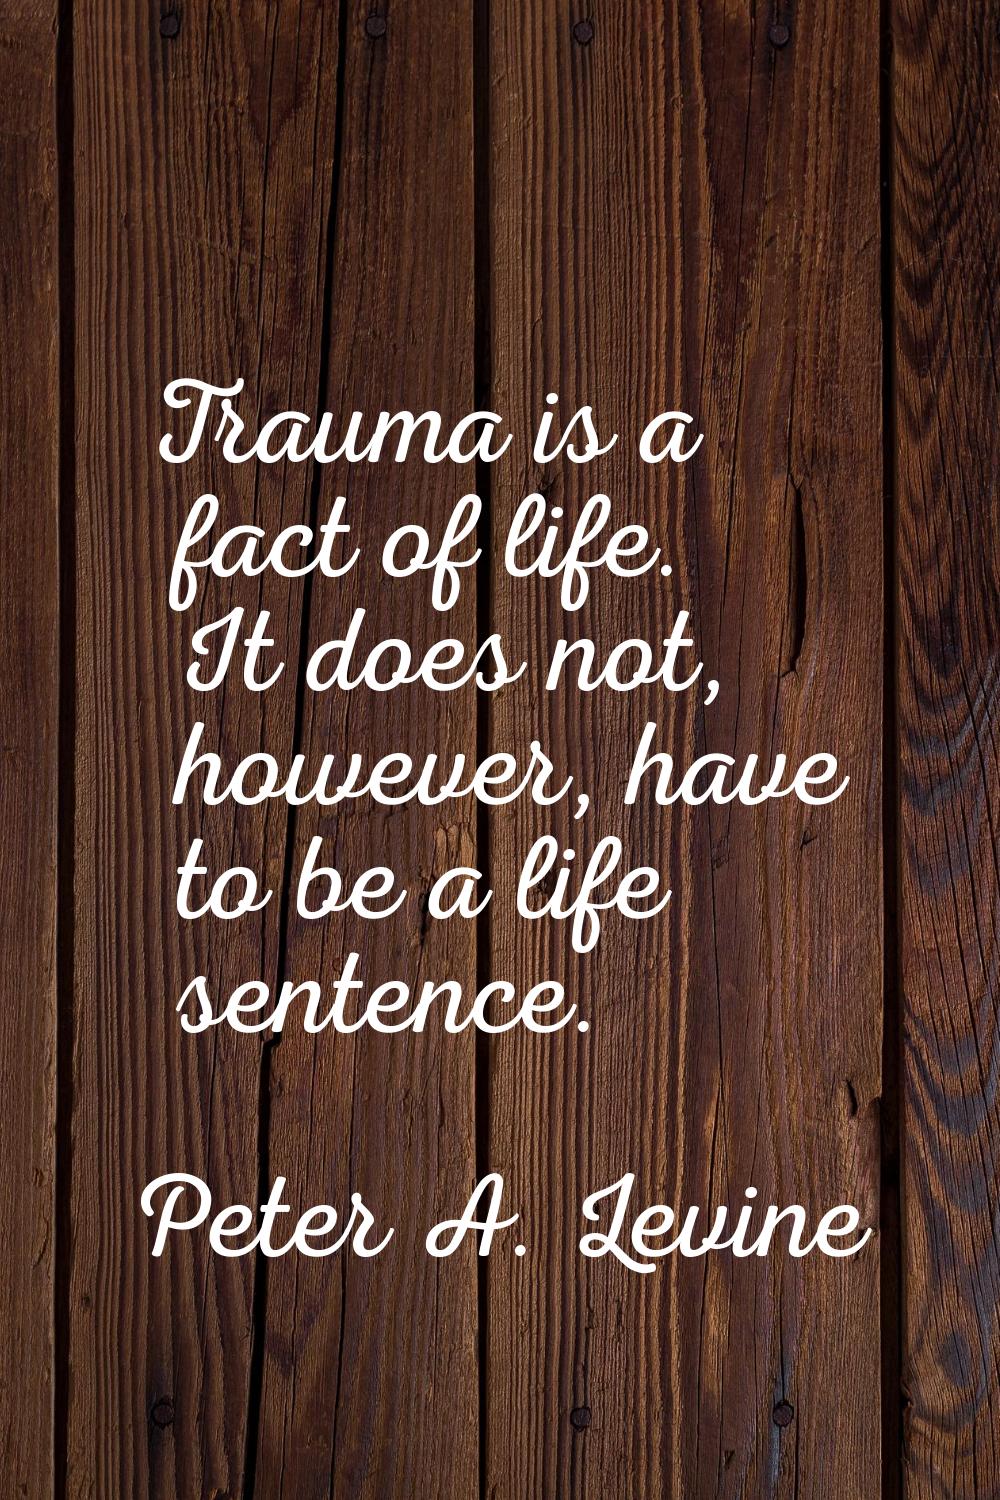 Trauma is a fact of life. It does not, however, have to be a life sentence.